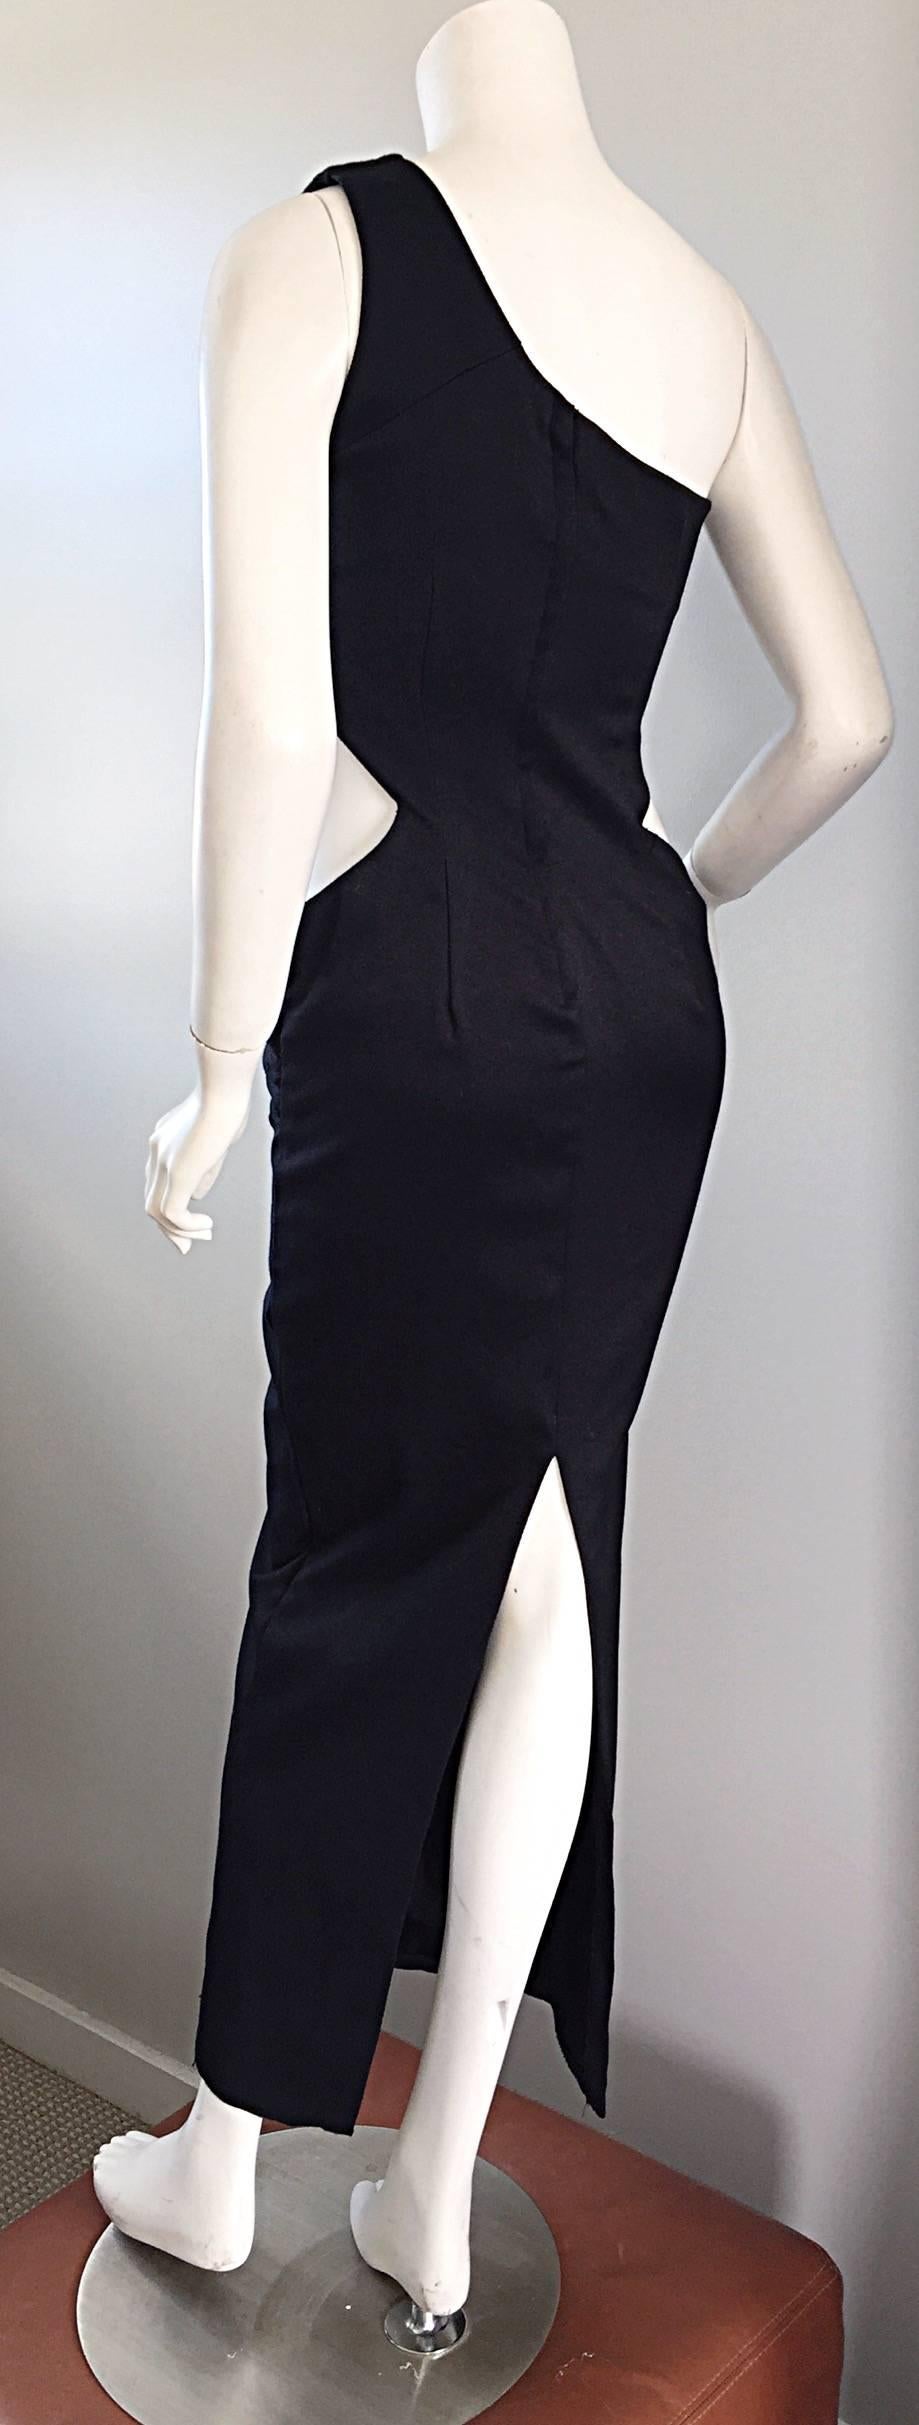 Black Vintage One Shoulder Cutout BodyCon Grecian Dress, 1990s   In Excellent Condition For Sale In San Diego, CA